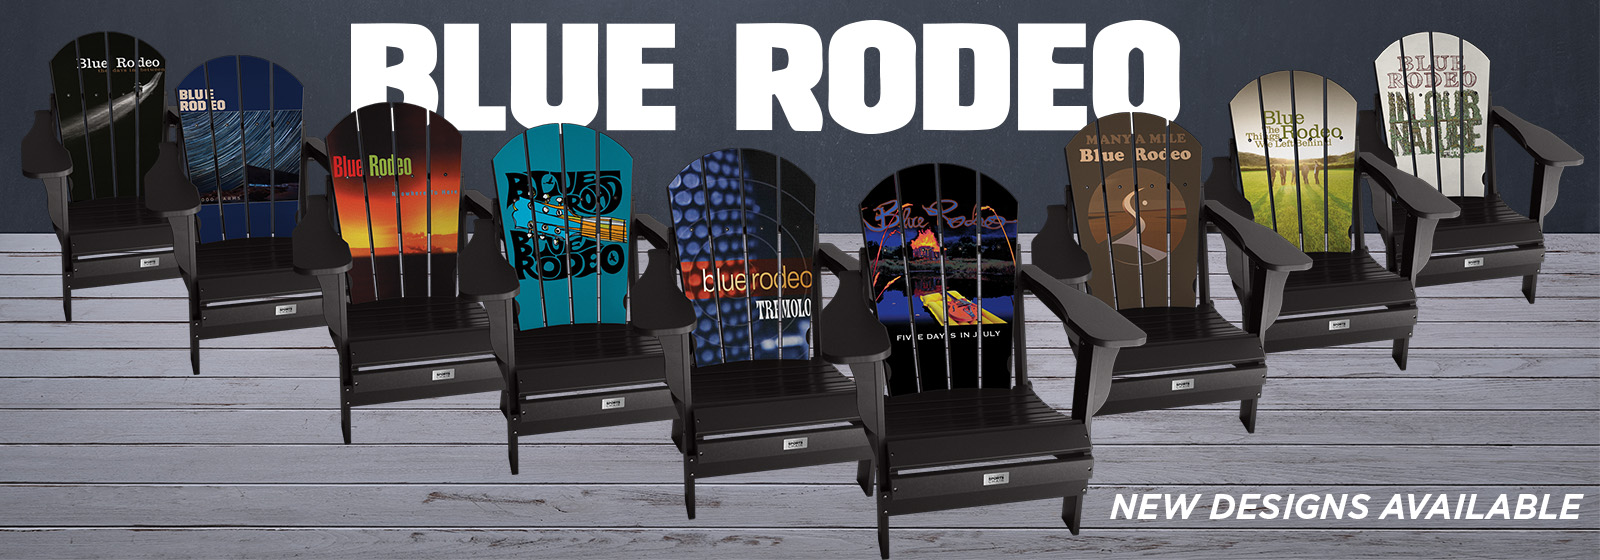 Blue Rodeo Chairs Banner 1600x560 V2